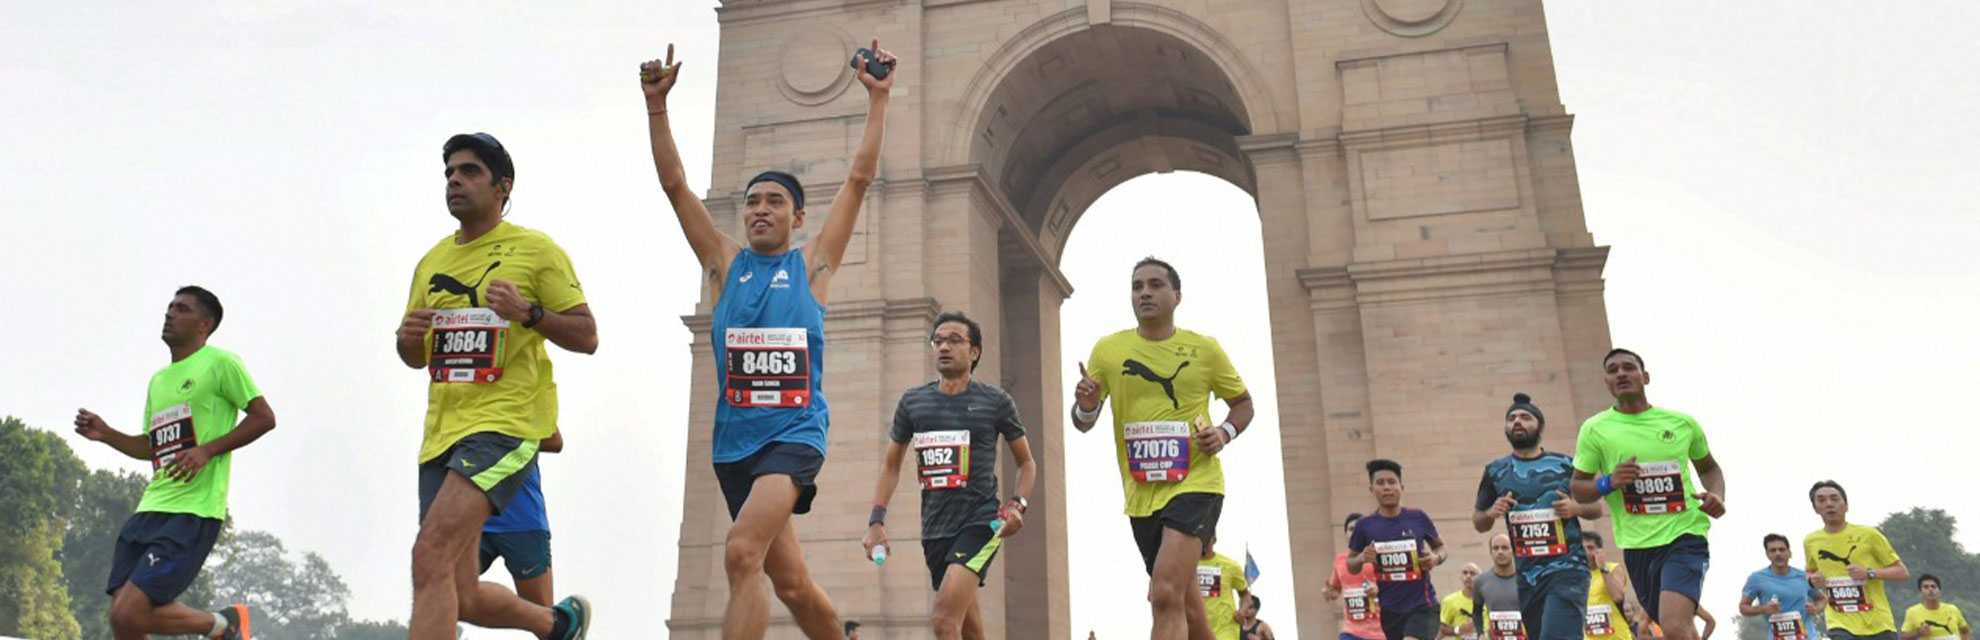 Marathons: How long-distance running became an avenue for philanthropy for Indian corporates